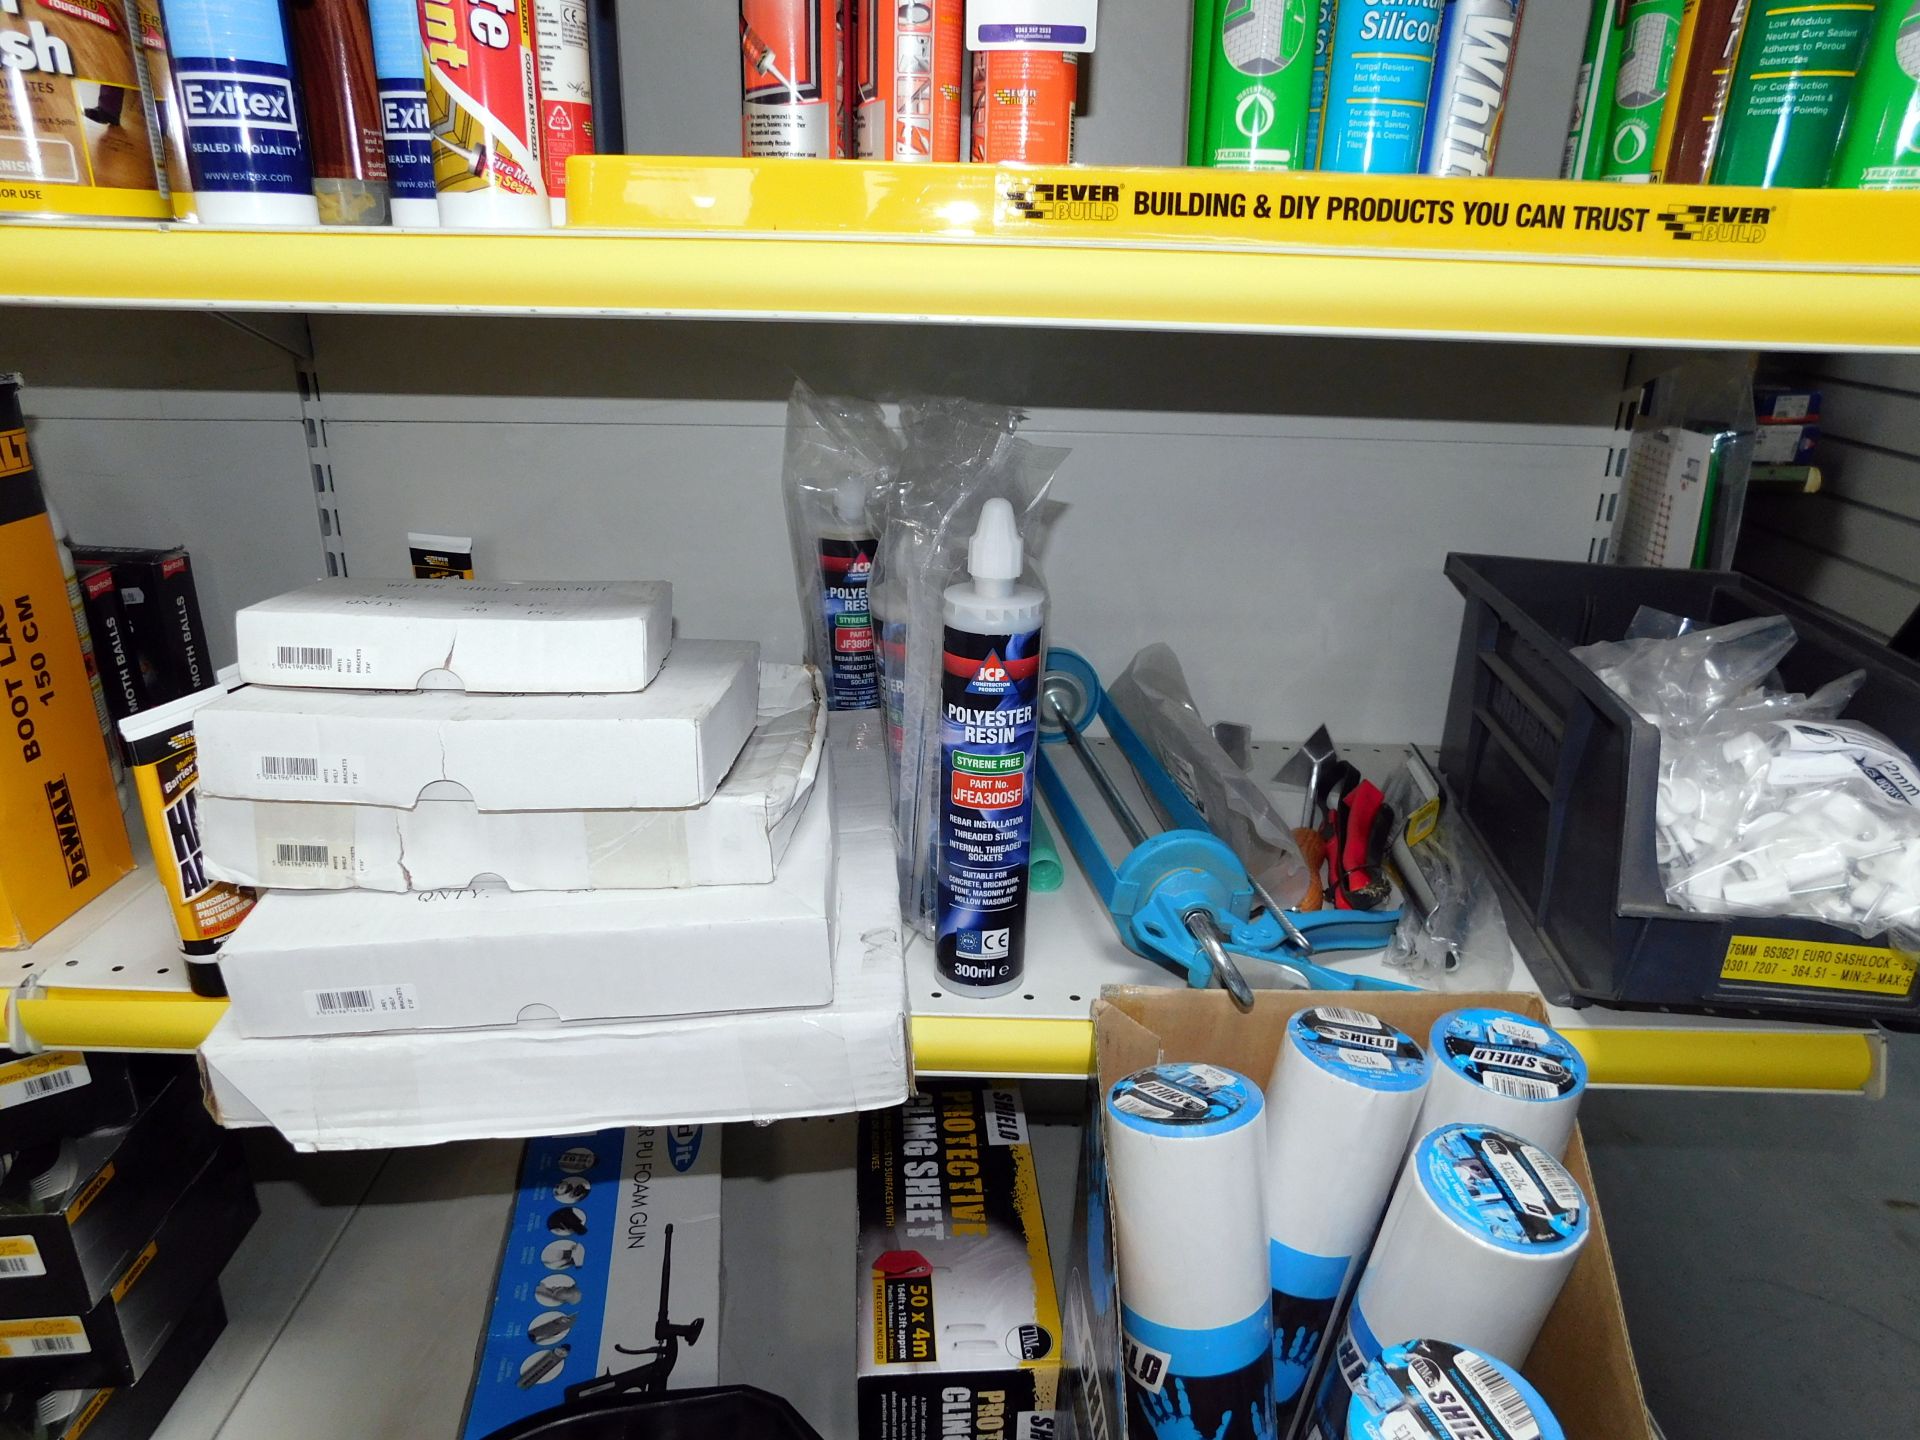 Contents of 8 Shelves to Include Fillers, Silicones, Varnish, Adhesives, Mastic Guns & - Image 6 of 10